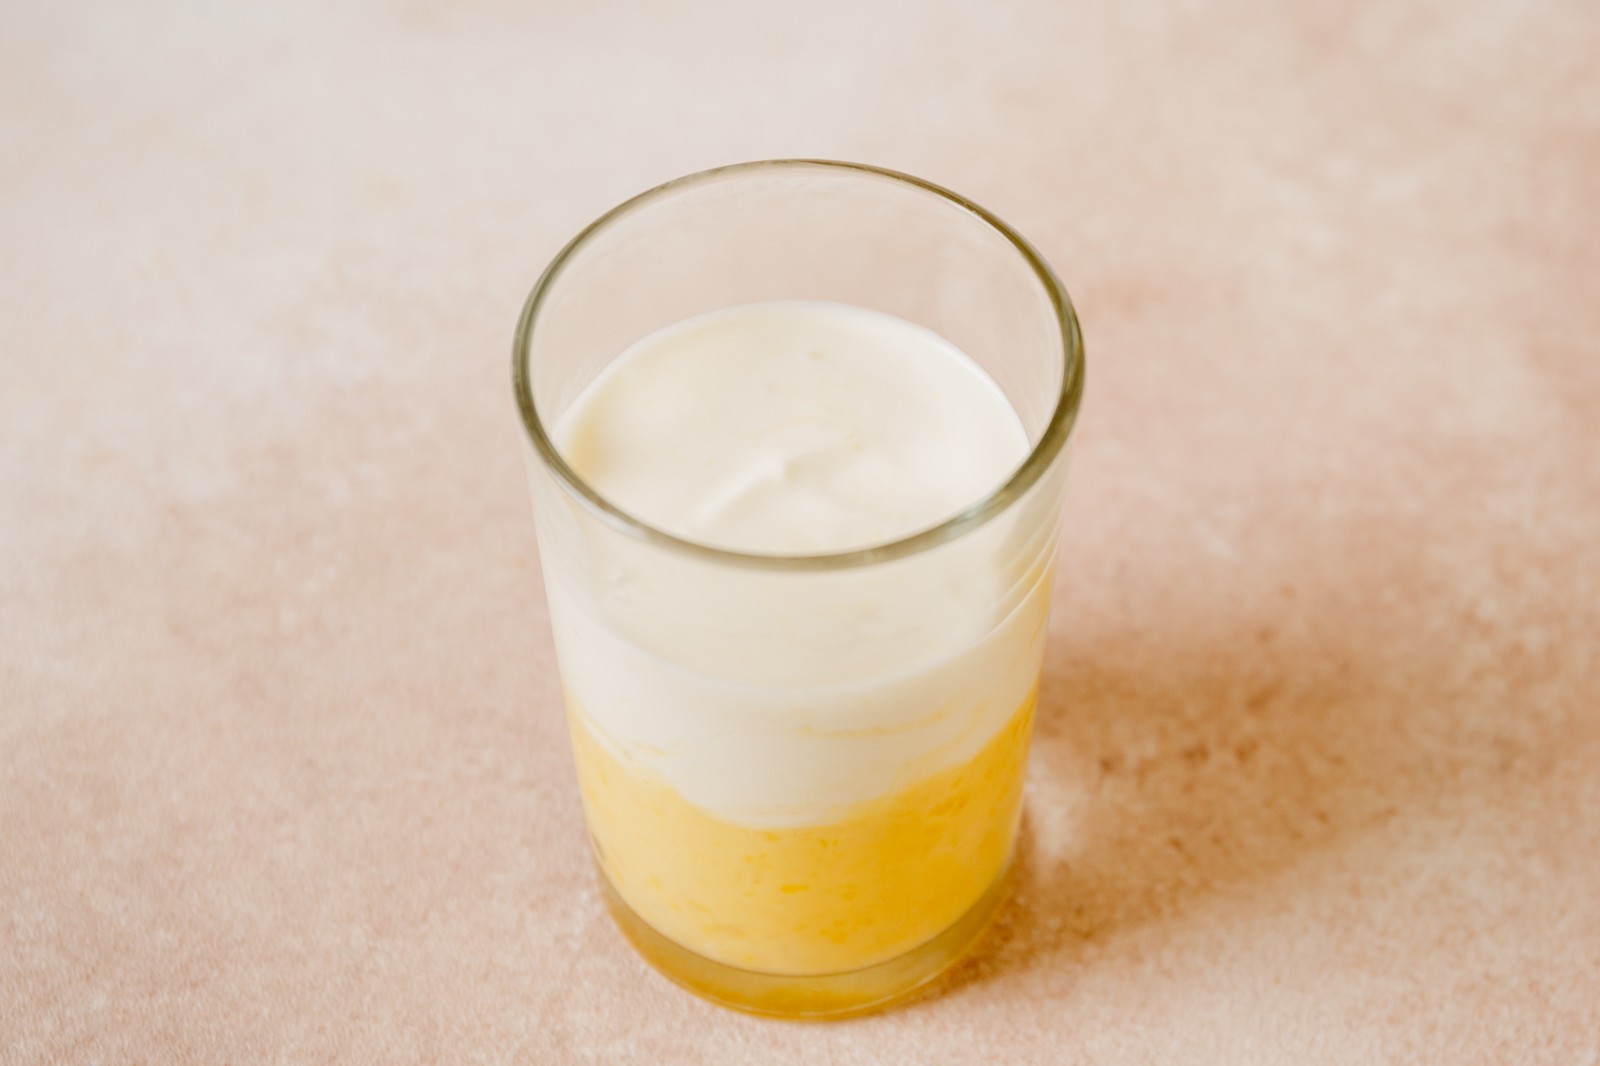 A glass filled with blended banana and whipped cream.